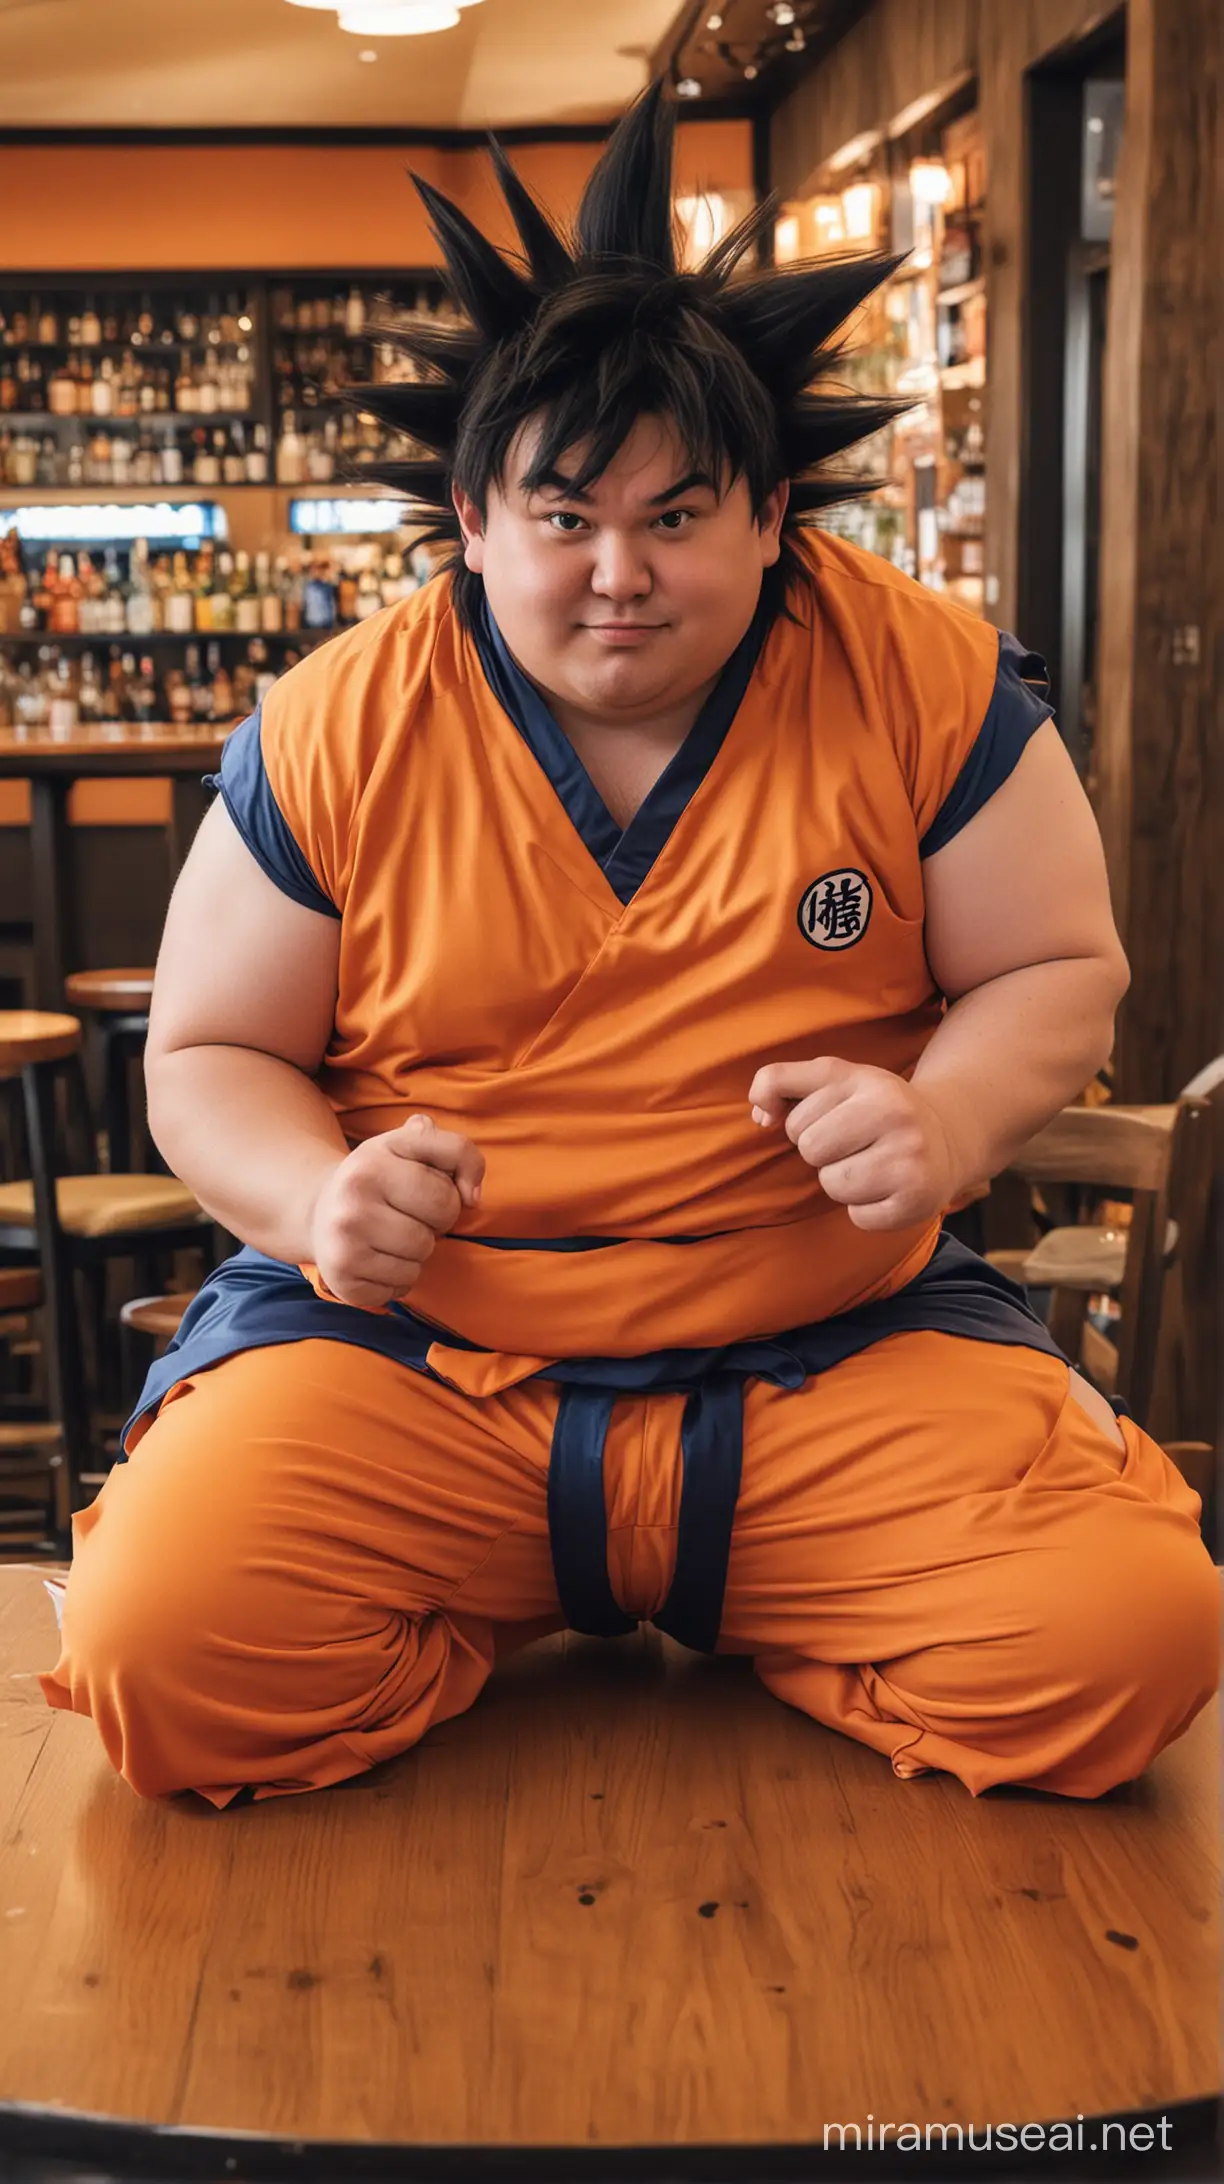 Chubby man dressed in a goku costume sitting in a bar at a small round table